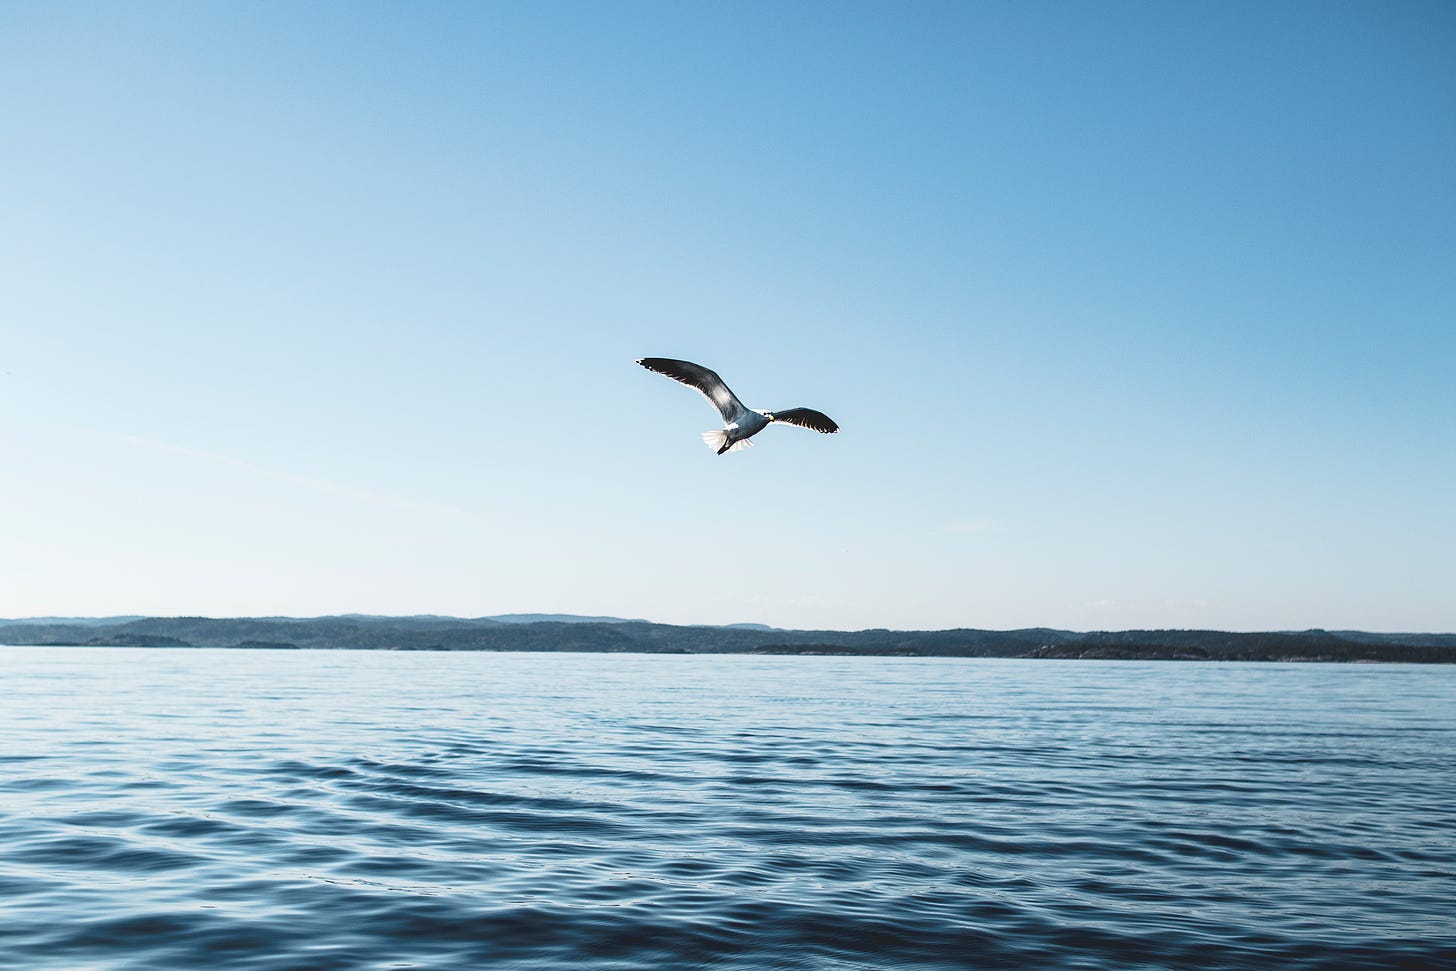 Public domain photo search for freedom: A gull flying low over a lake under a clear blue sky. by Sindre Fs